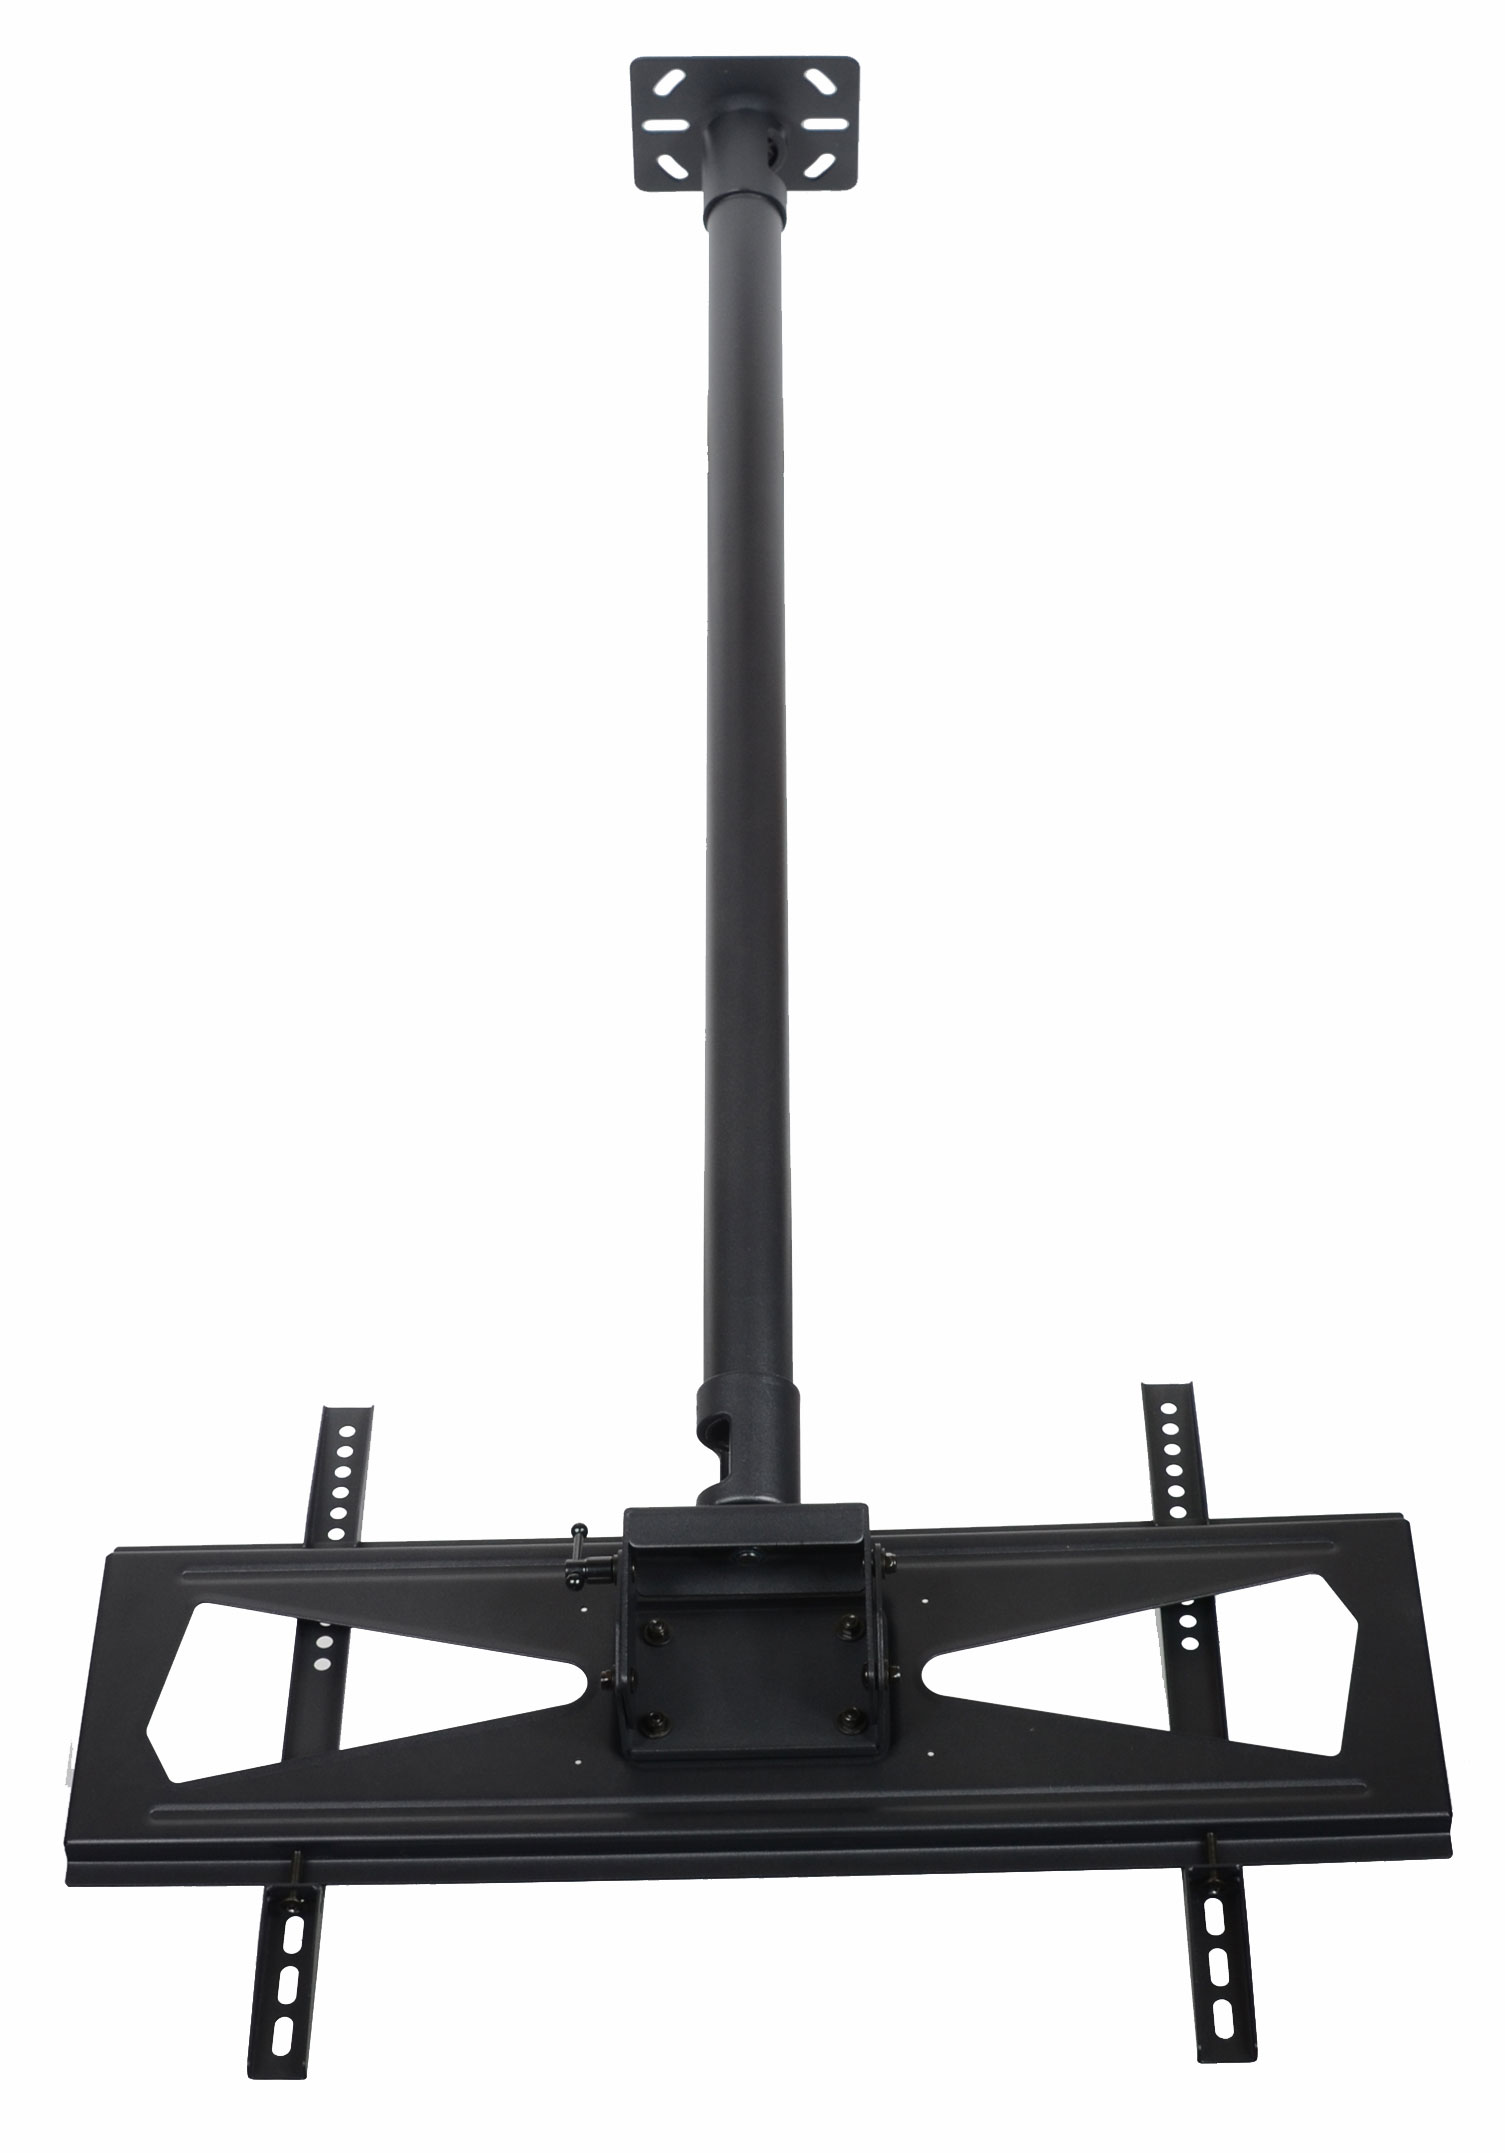 VideoSecu Tilt TV Ceiling Mount for 37 39 40 42 43 46 47 48 50 55 60 65" LCD LED Plasma with 900mm Fixed Height Pole b37 - image 2 of 4